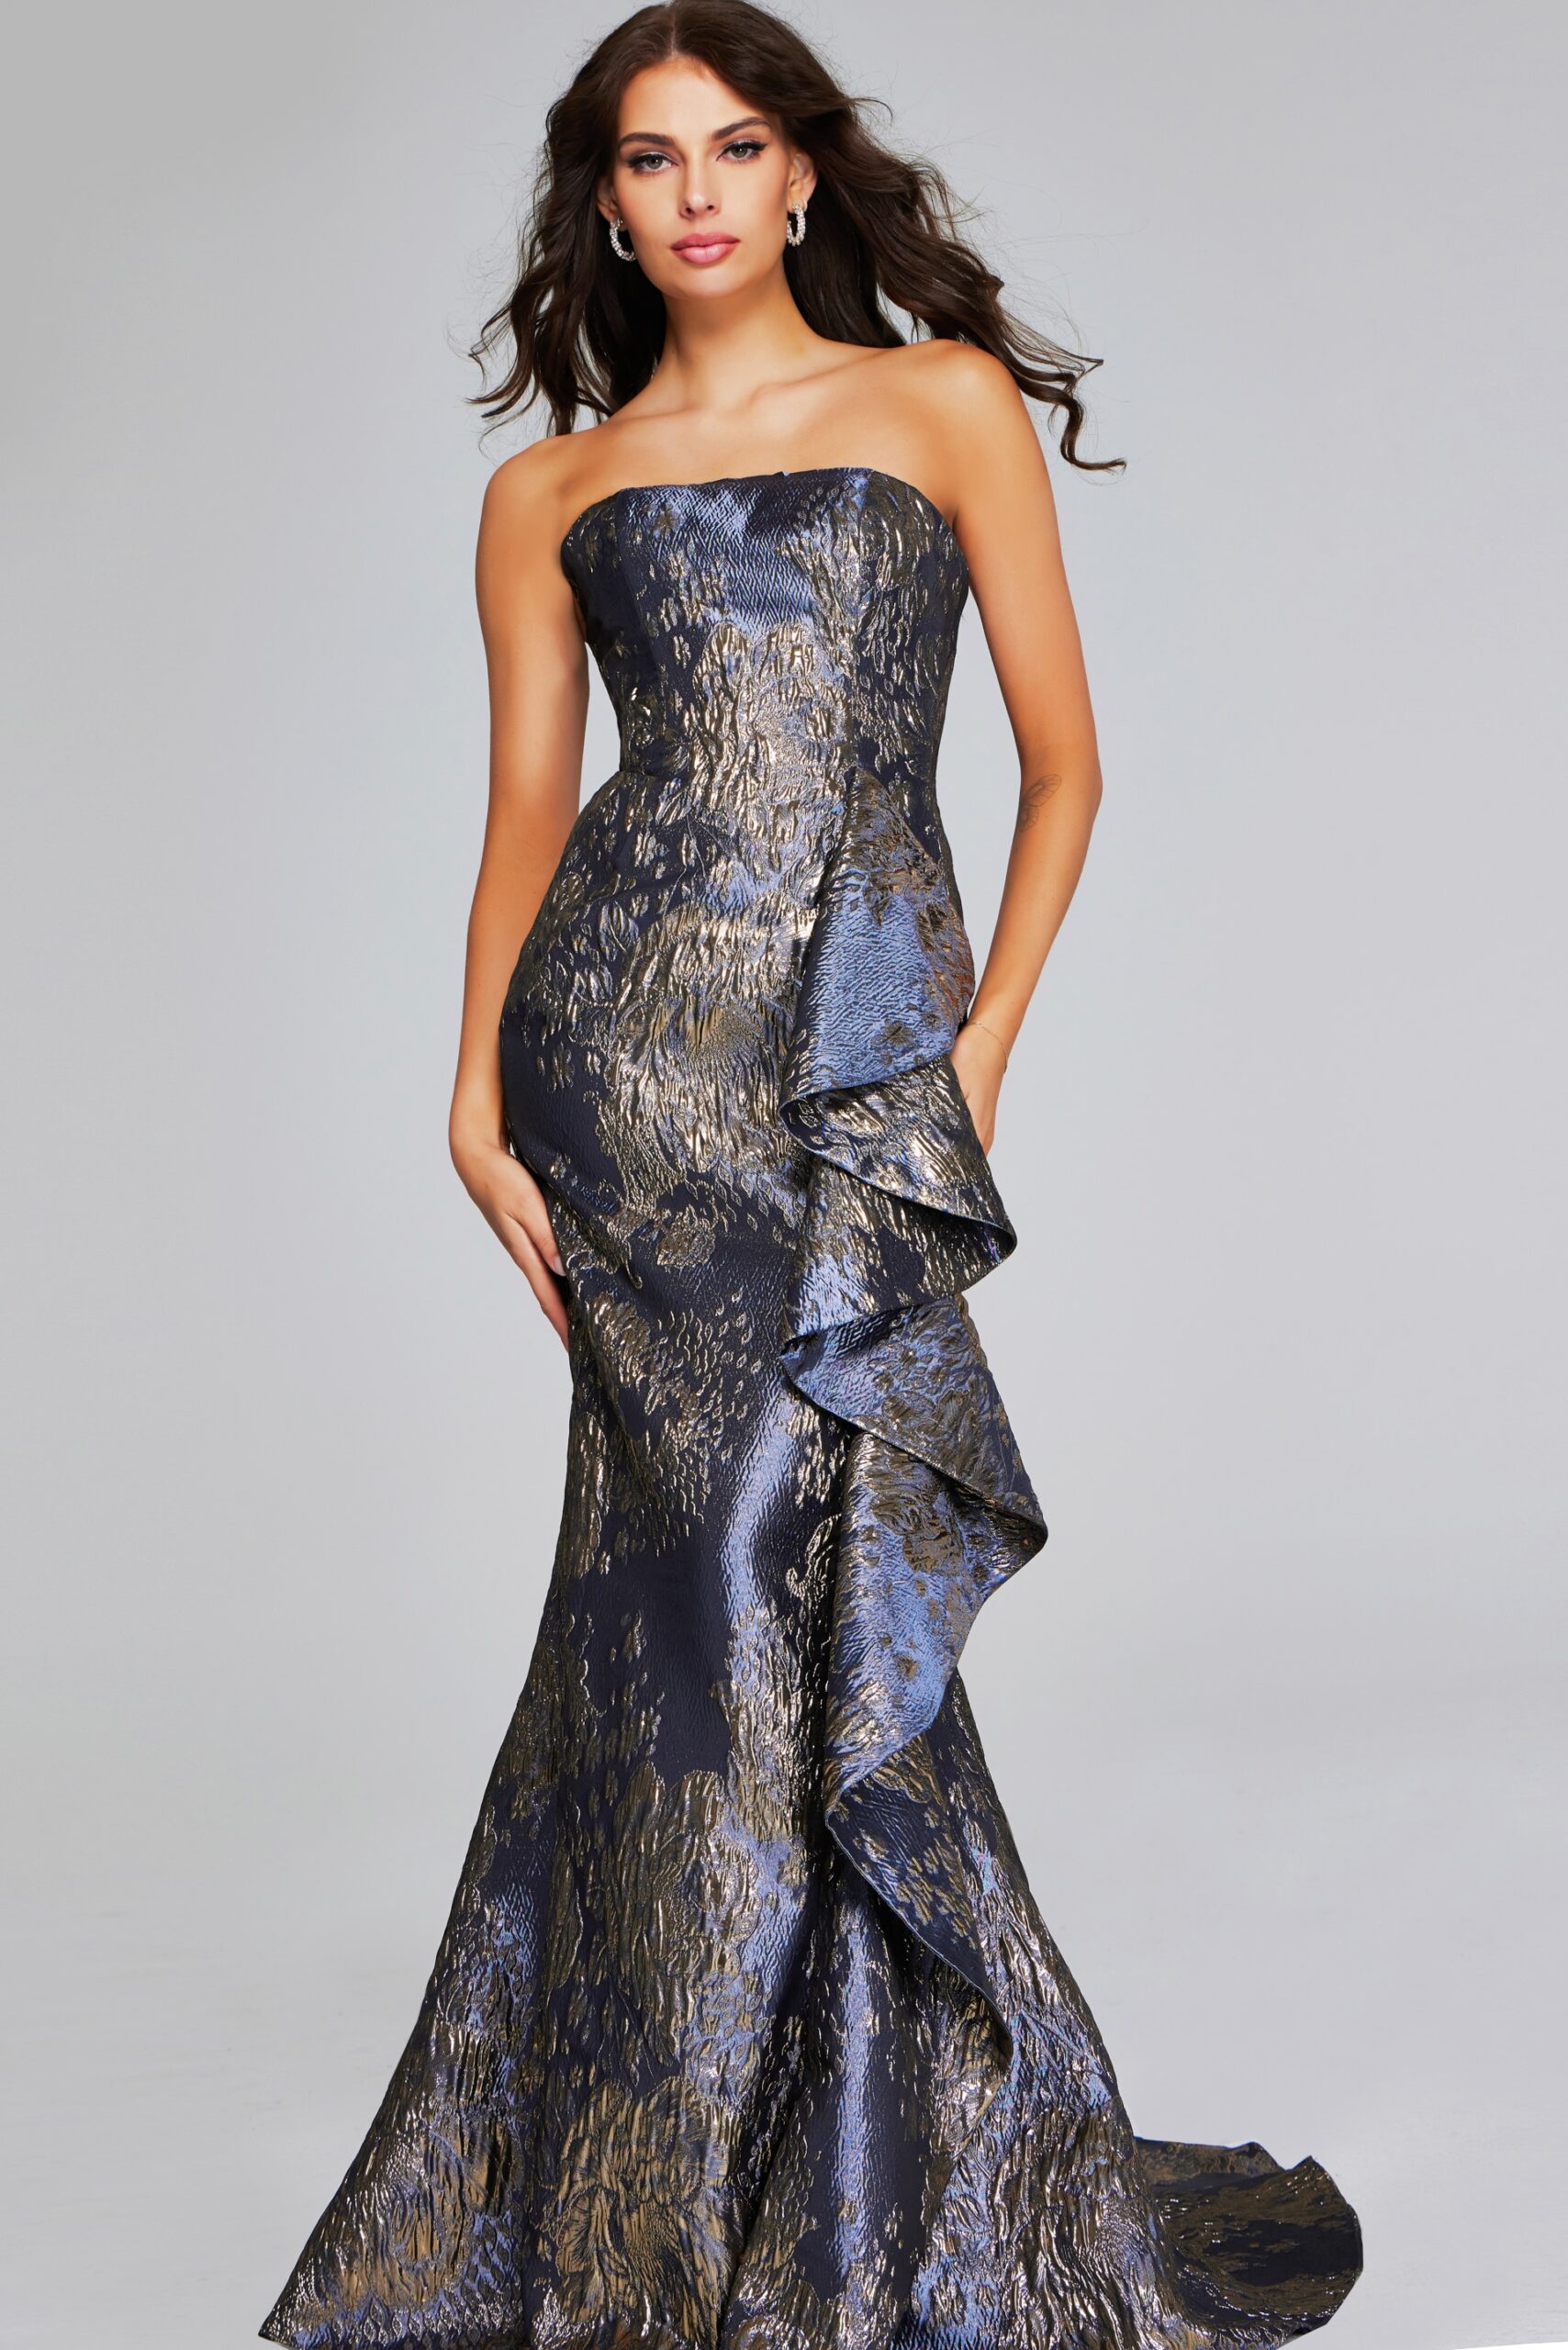 Model wearing Gunmetal and Gold Strapless Gown with Cascading Ruffle 42028